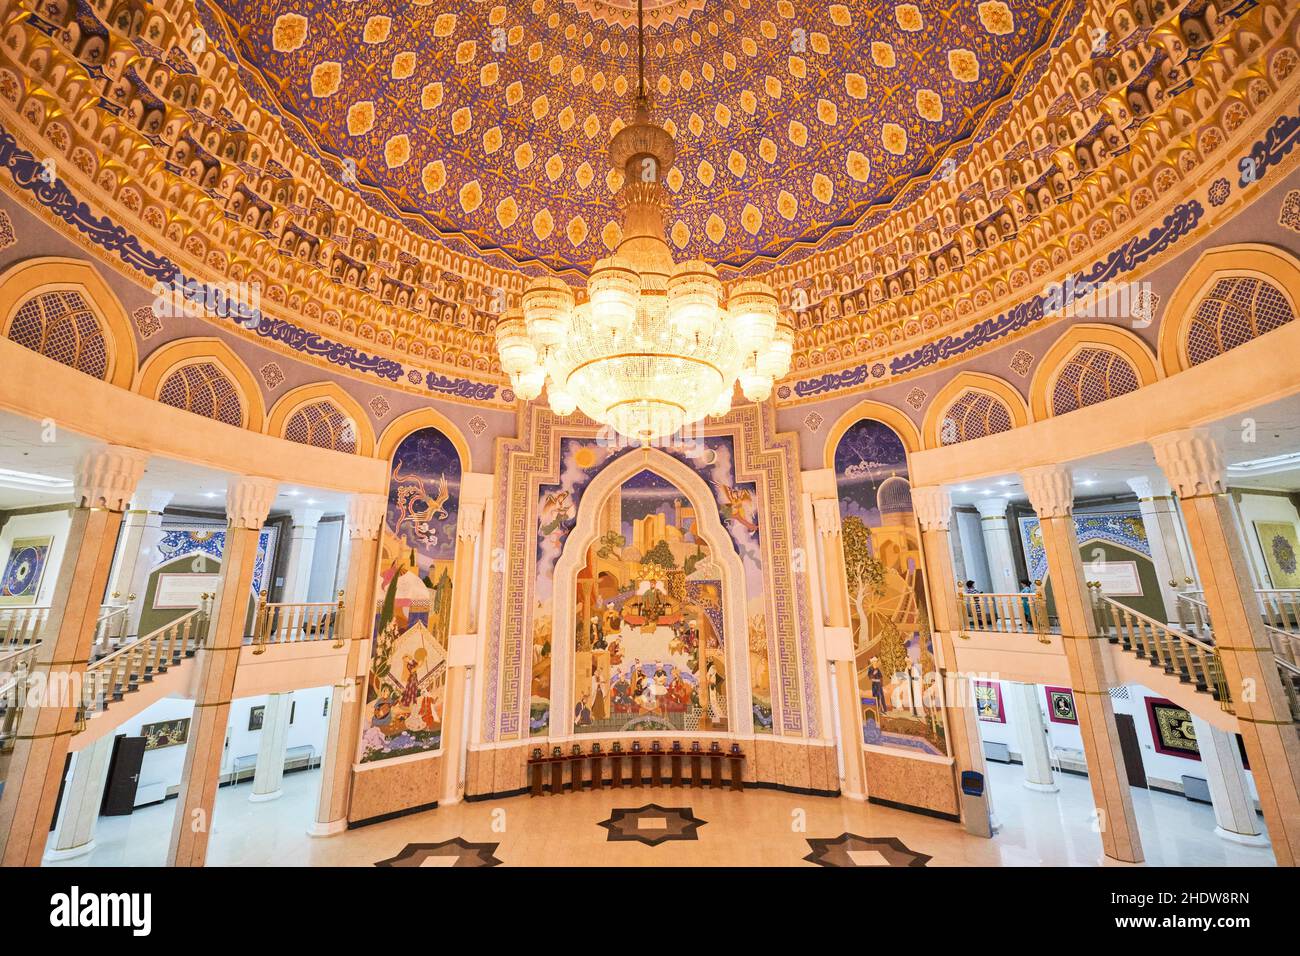 The golden, richly detailed interior atrium with large mural and chandelier. At the Amir Timur museum in Tashkent, Uzbekistan. Stock Photo